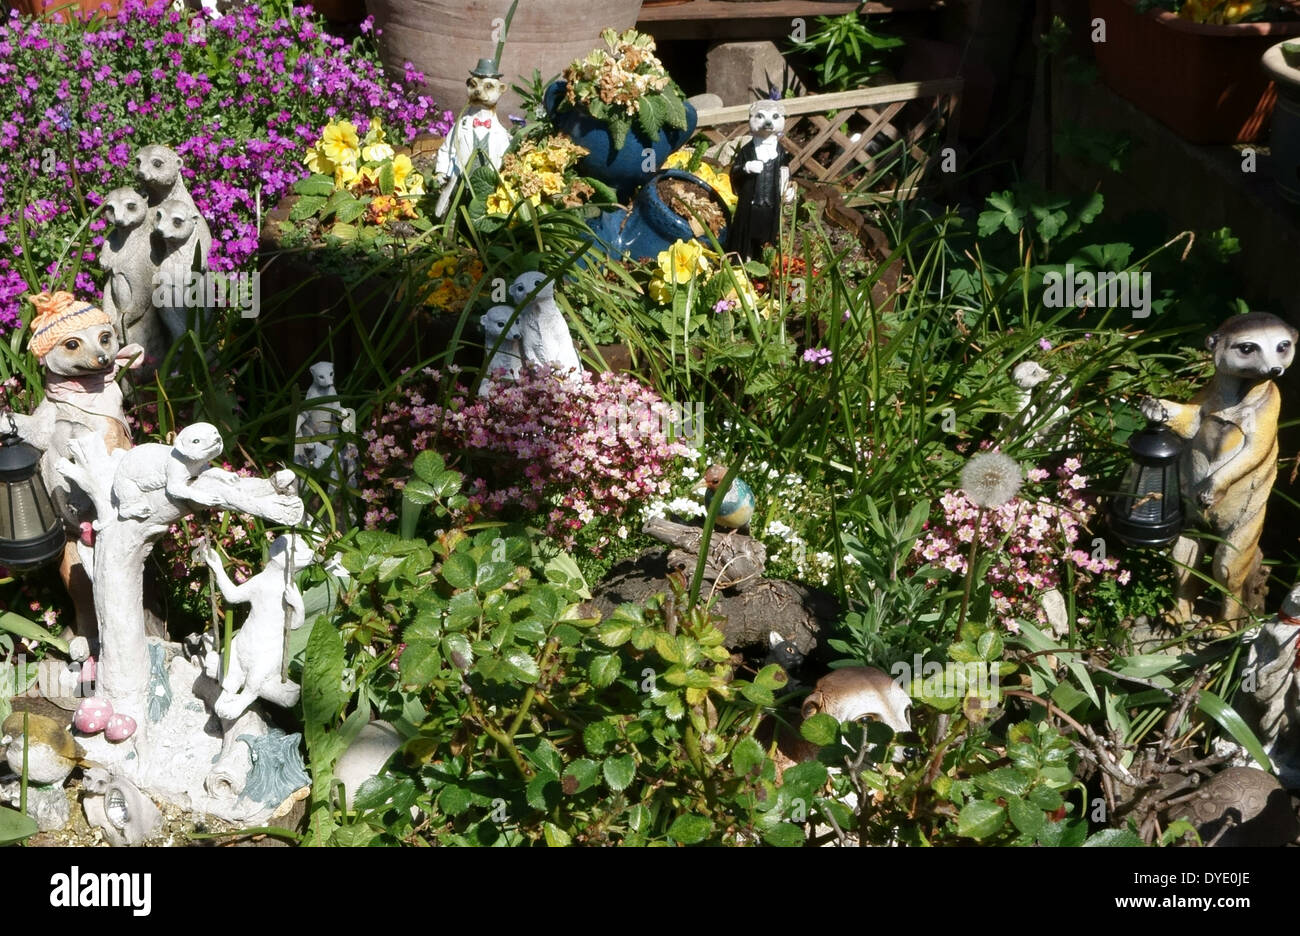 Garden in South London with meerkat ornaments Stock Photo